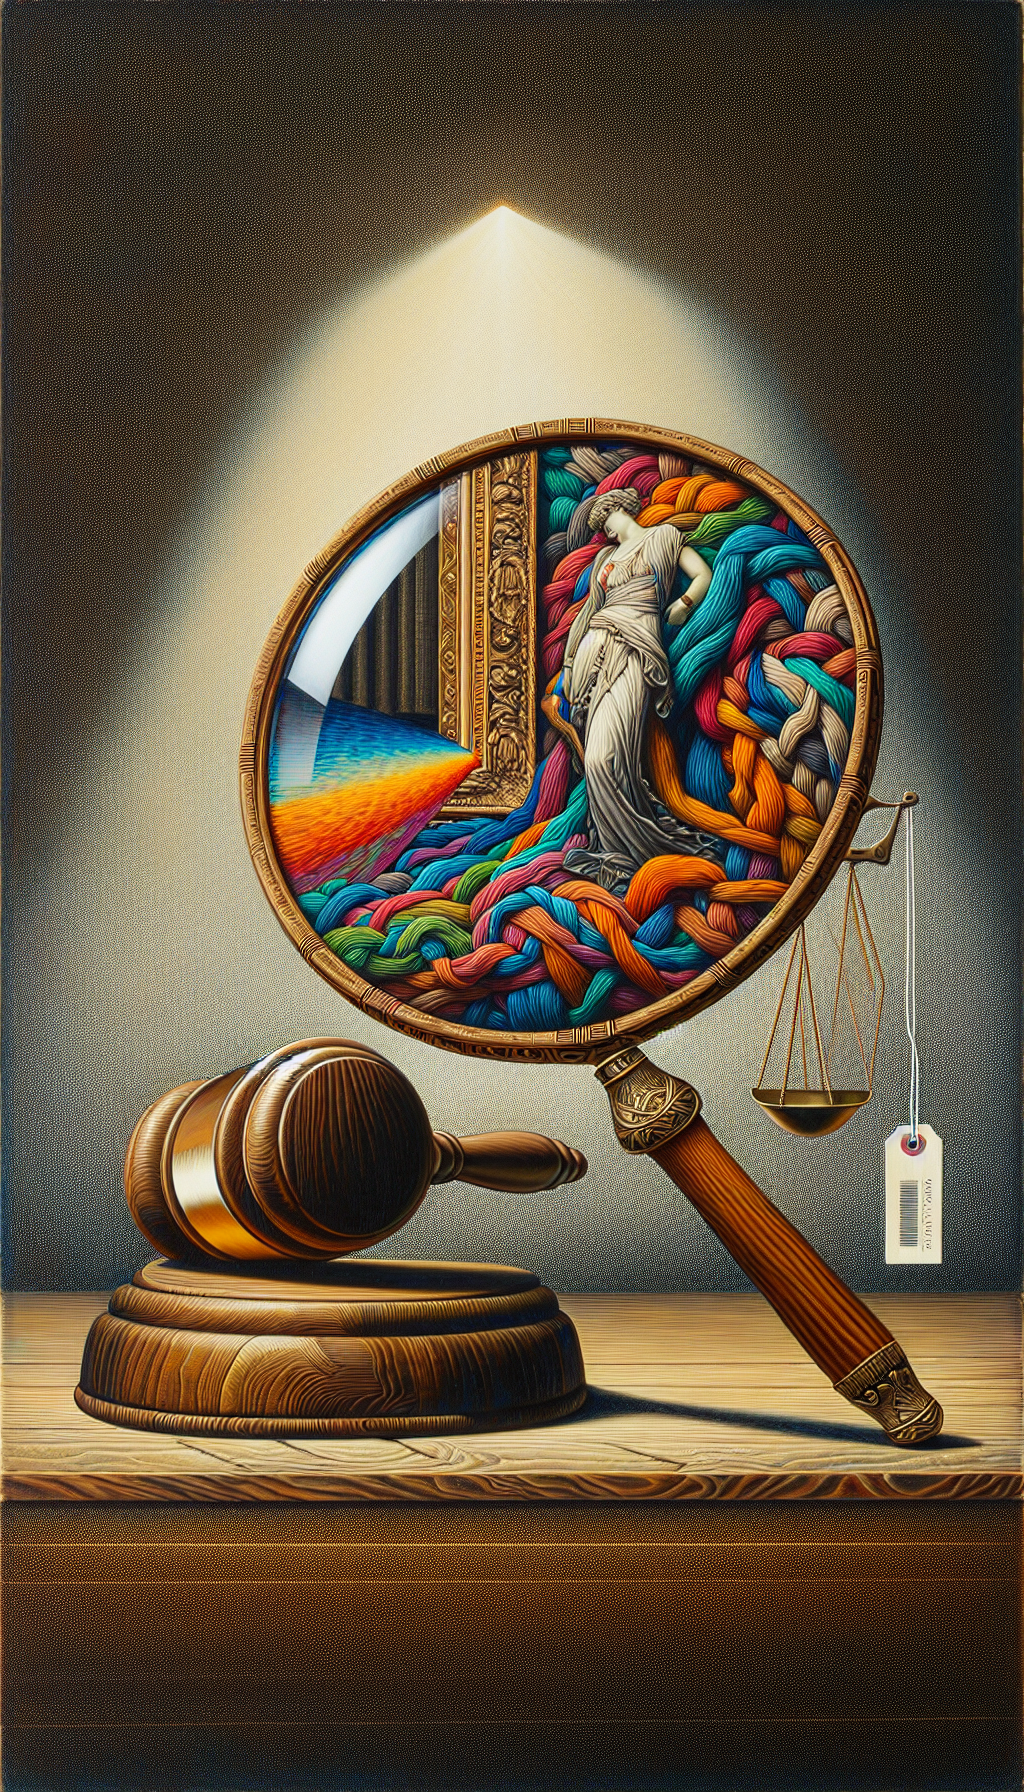 An intricately detailed magnifying glass hovers over a classic painting, its lens revealing a distinct contrast—the vividly colored fabric of rarity intertwining with grayscale threads of condition. Beneath, a gavel and an 'appraisal tag,' unite, symbolizing the art's valuation. The image seamlessly melds cubist and hyper-realistic styles, embodying the multifaceted nature of art appraisal.